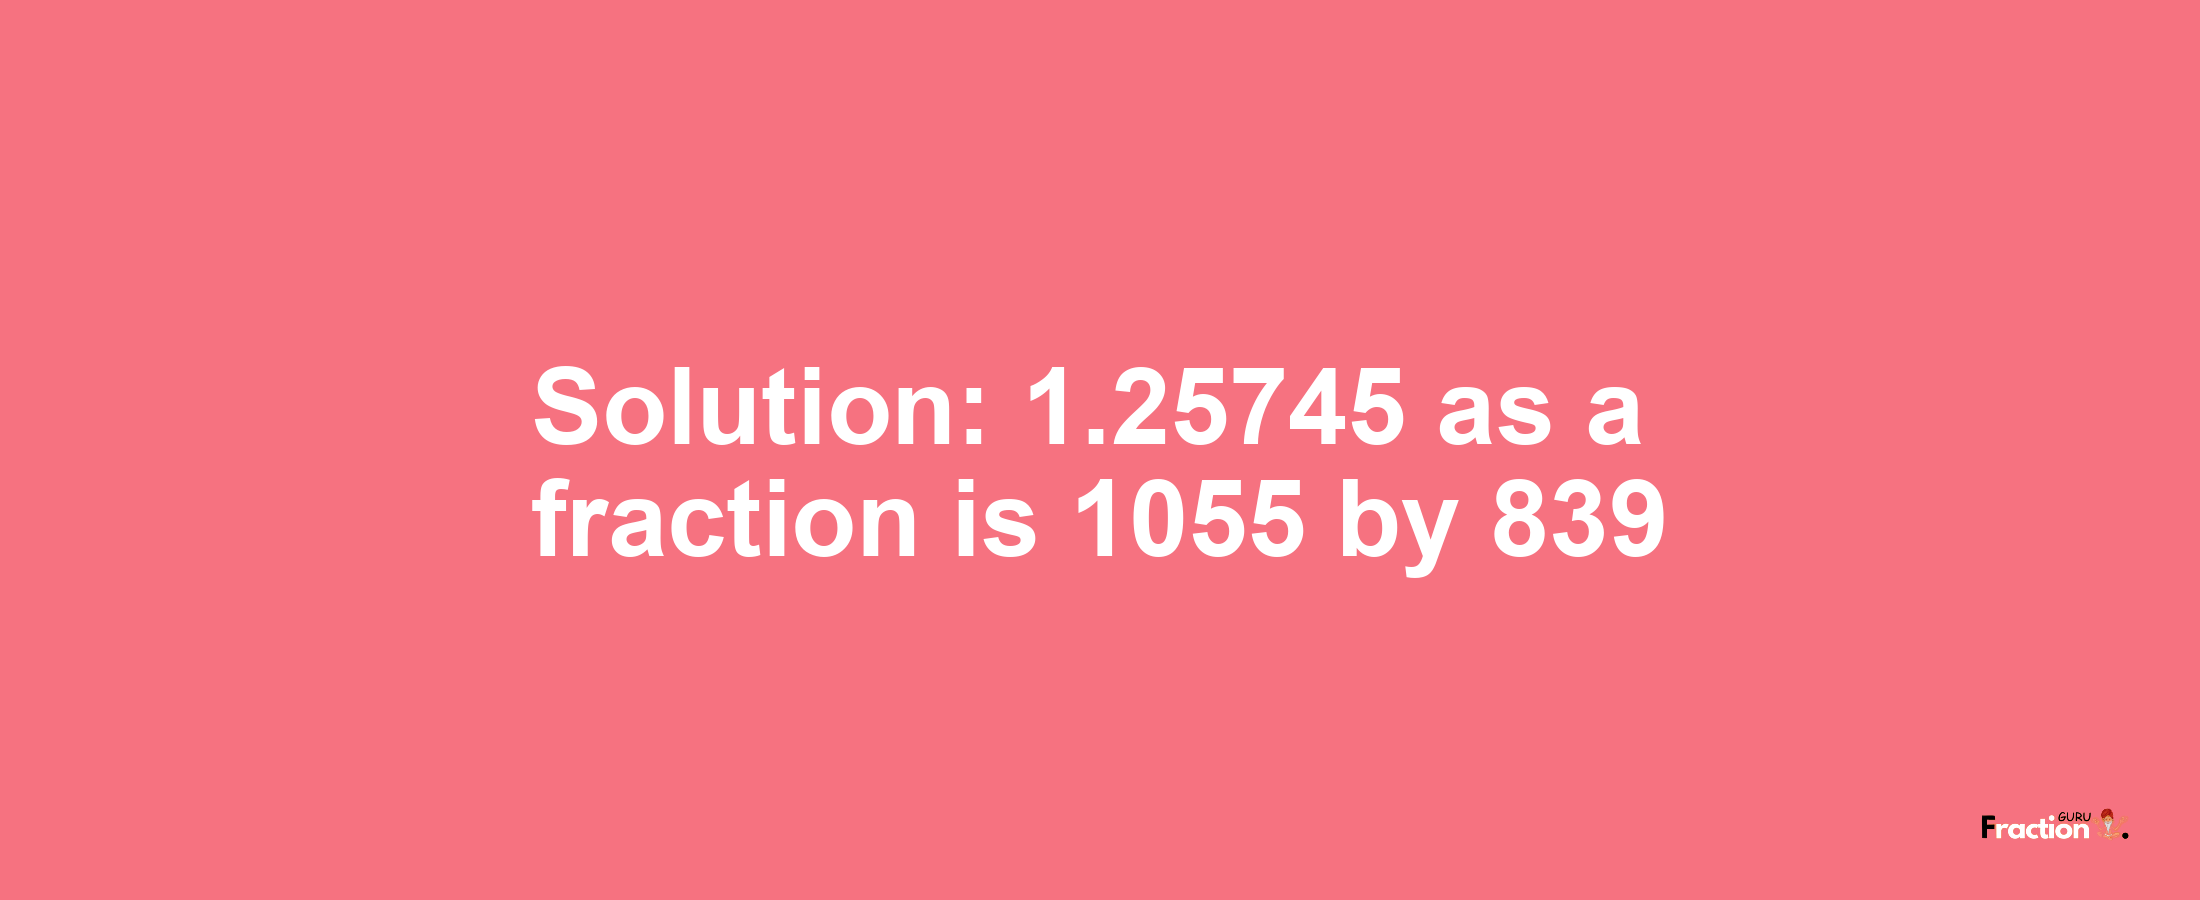 Solution:1.25745 as a fraction is 1055/839